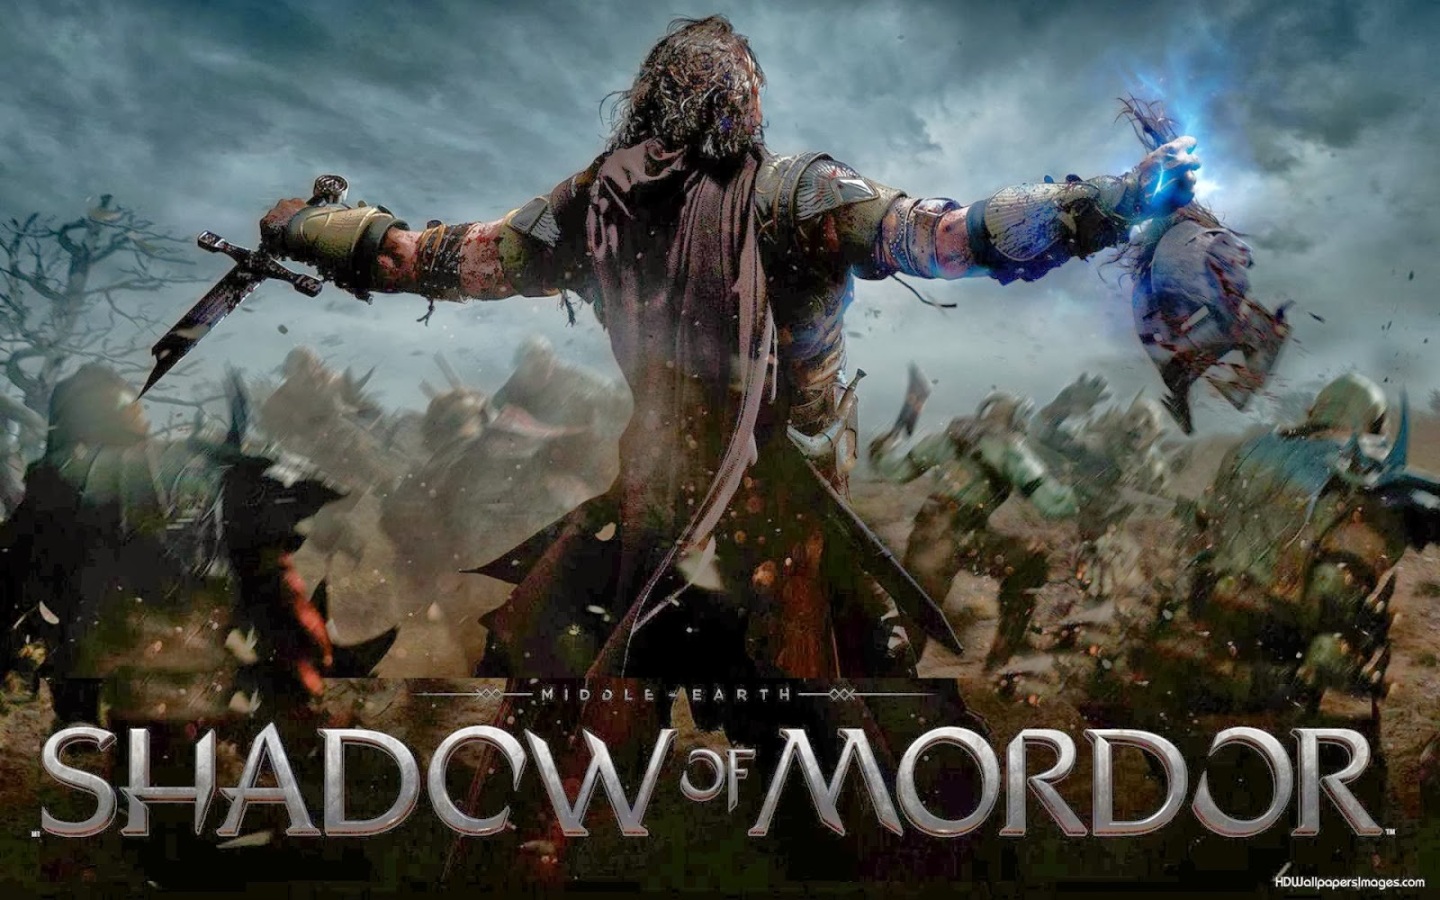 Middle-Earth: Shadow of Mordor PS4 Pro Update Offers Native 4K